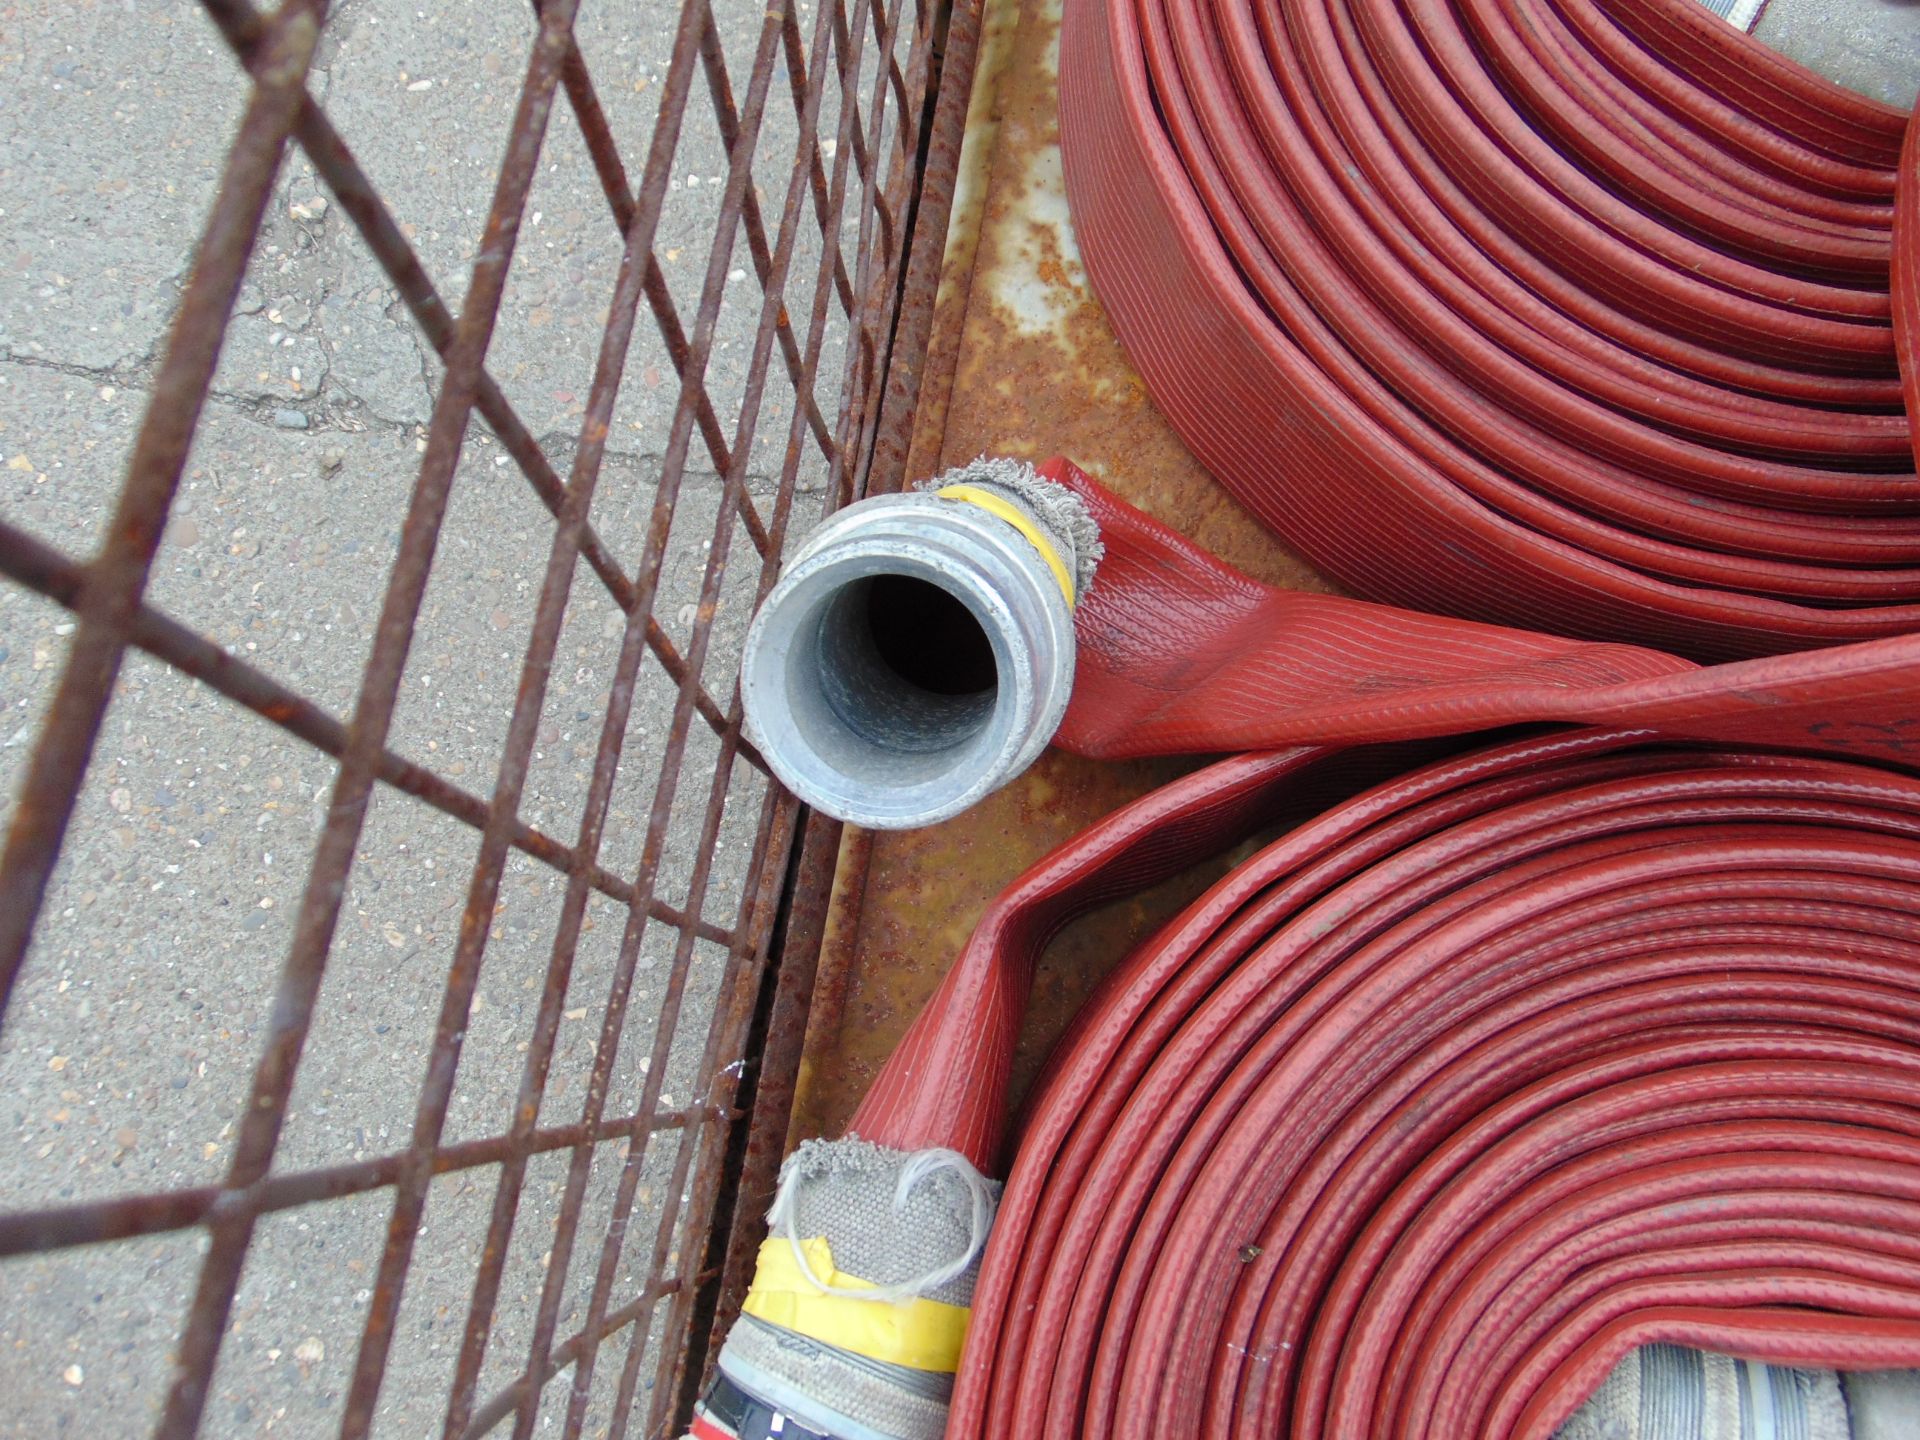 5 x Angus 64mm x 23m Layflat Fire Hoses with Couplings Sold as shown without warranty. - Image 4 of 4